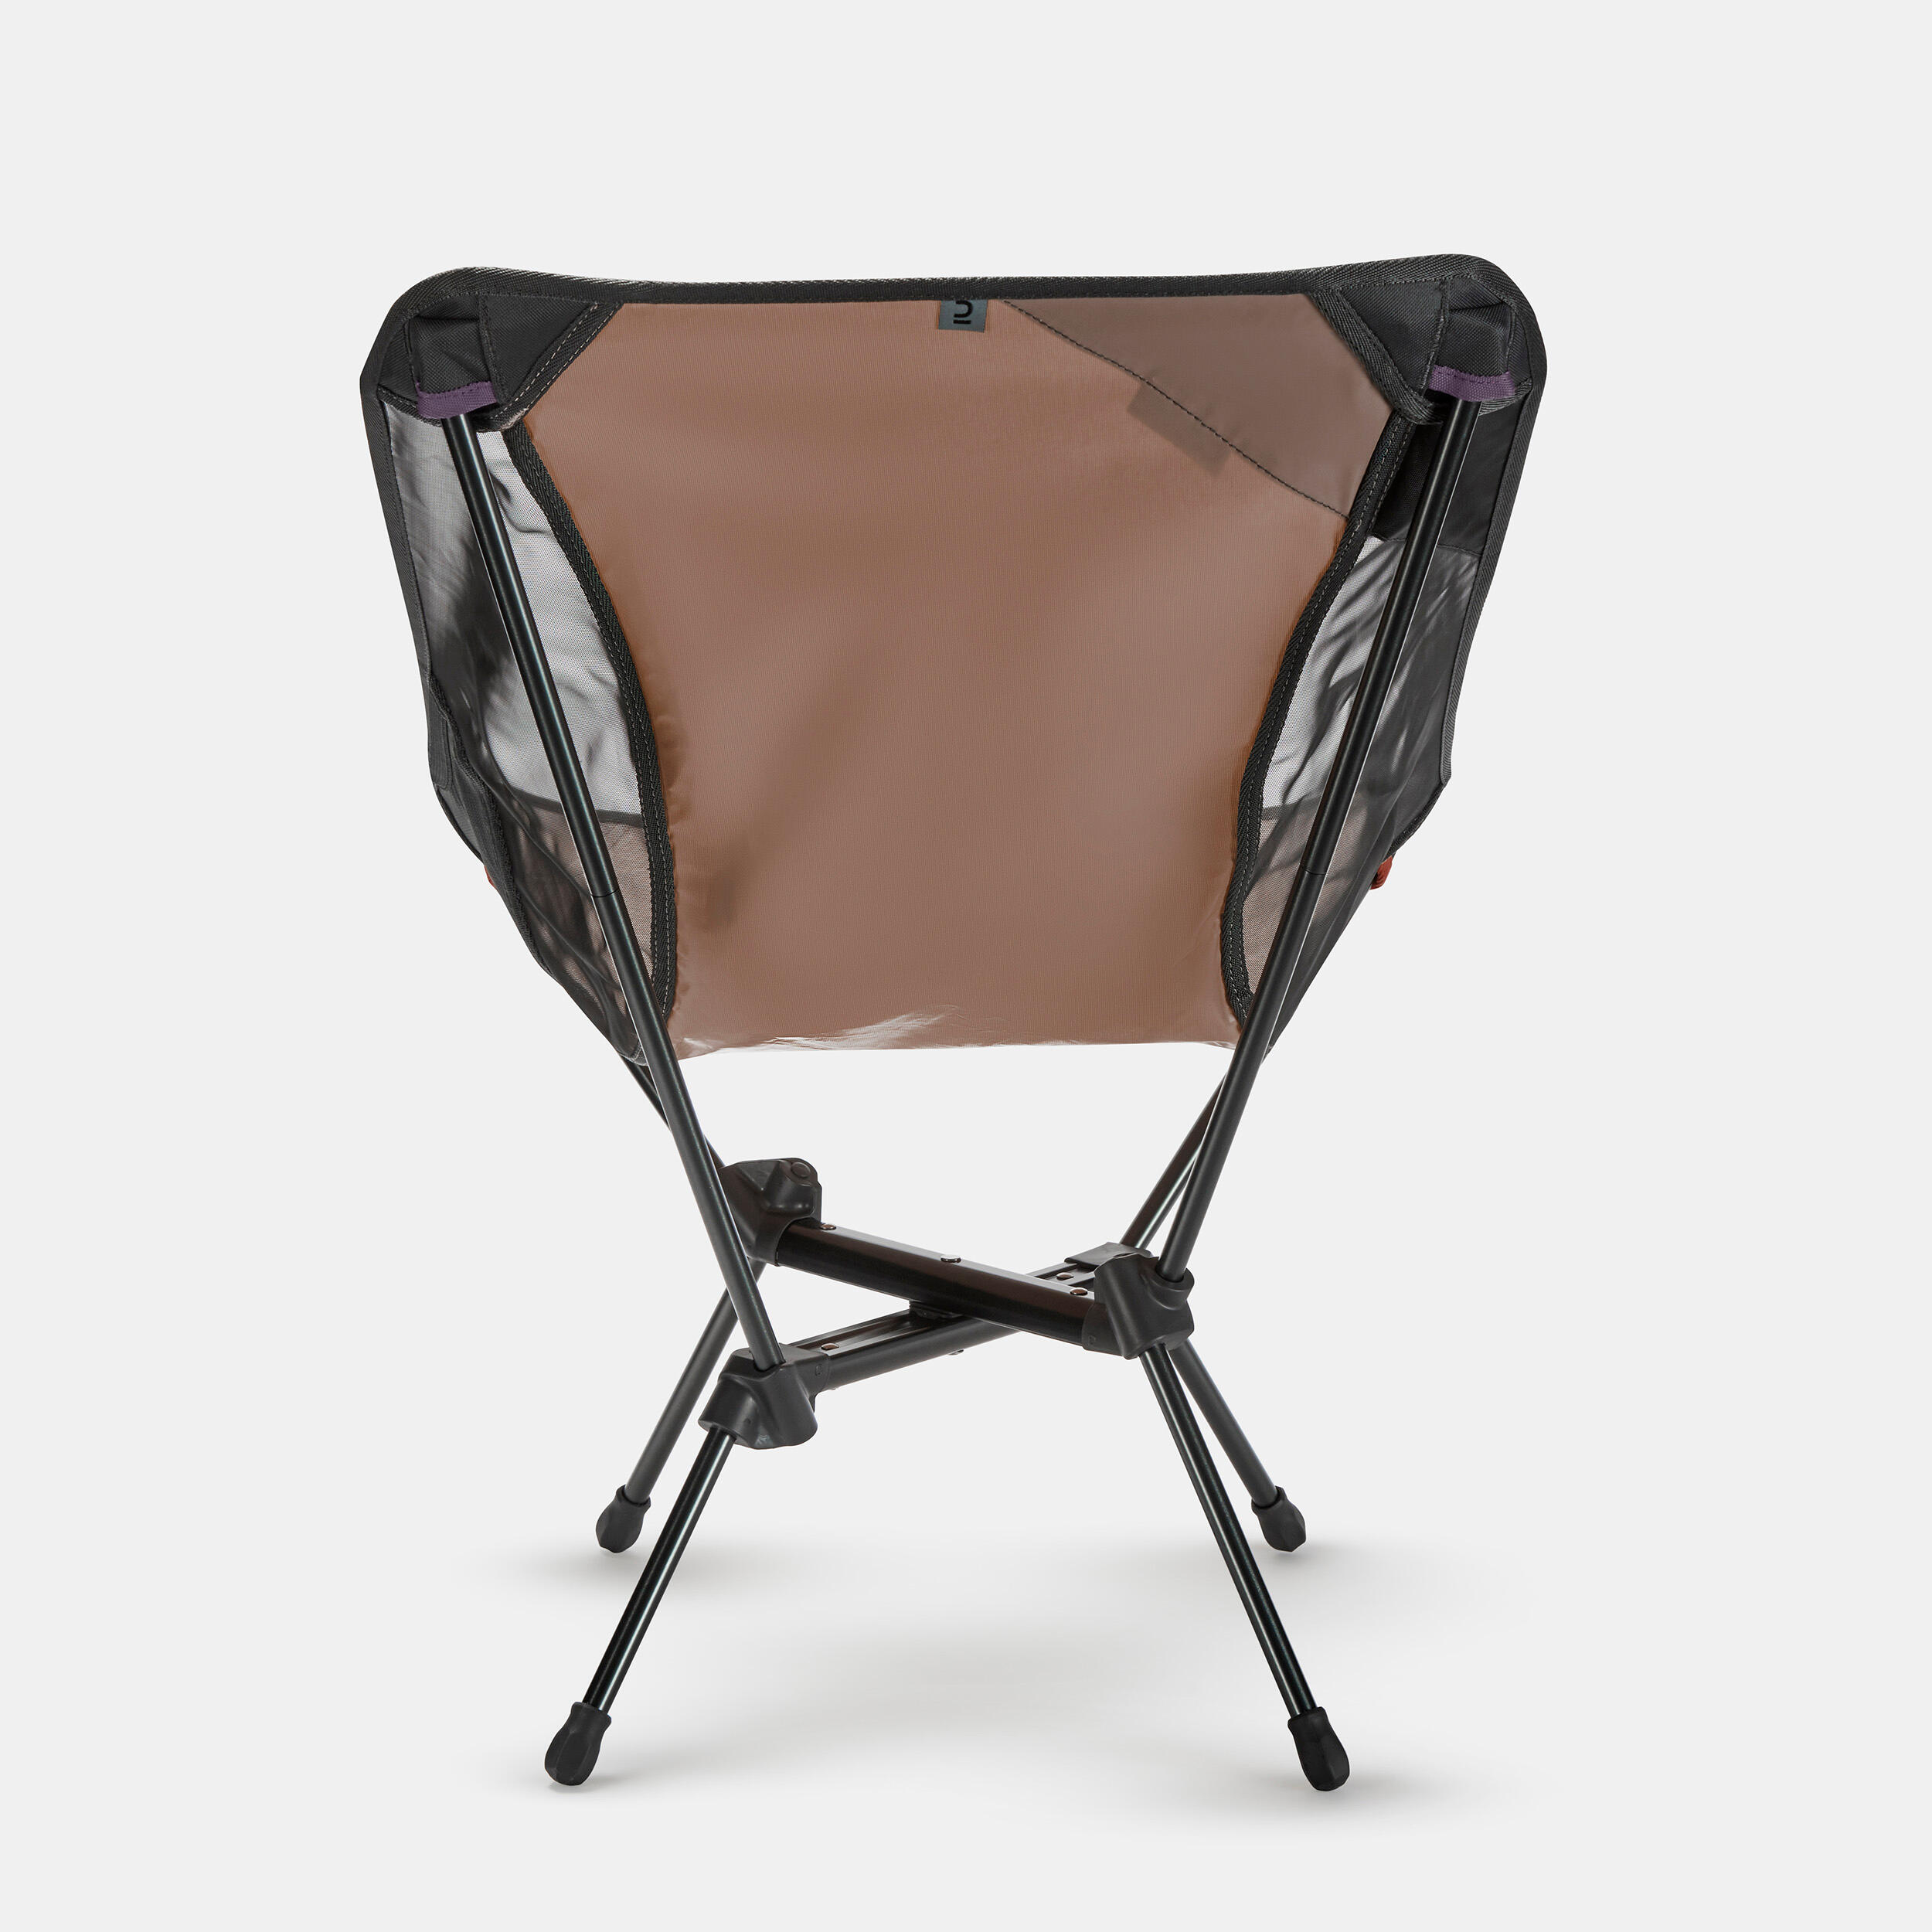 LOW FOLDING CAMPING CHAIR MH500 - BROWN 8/10